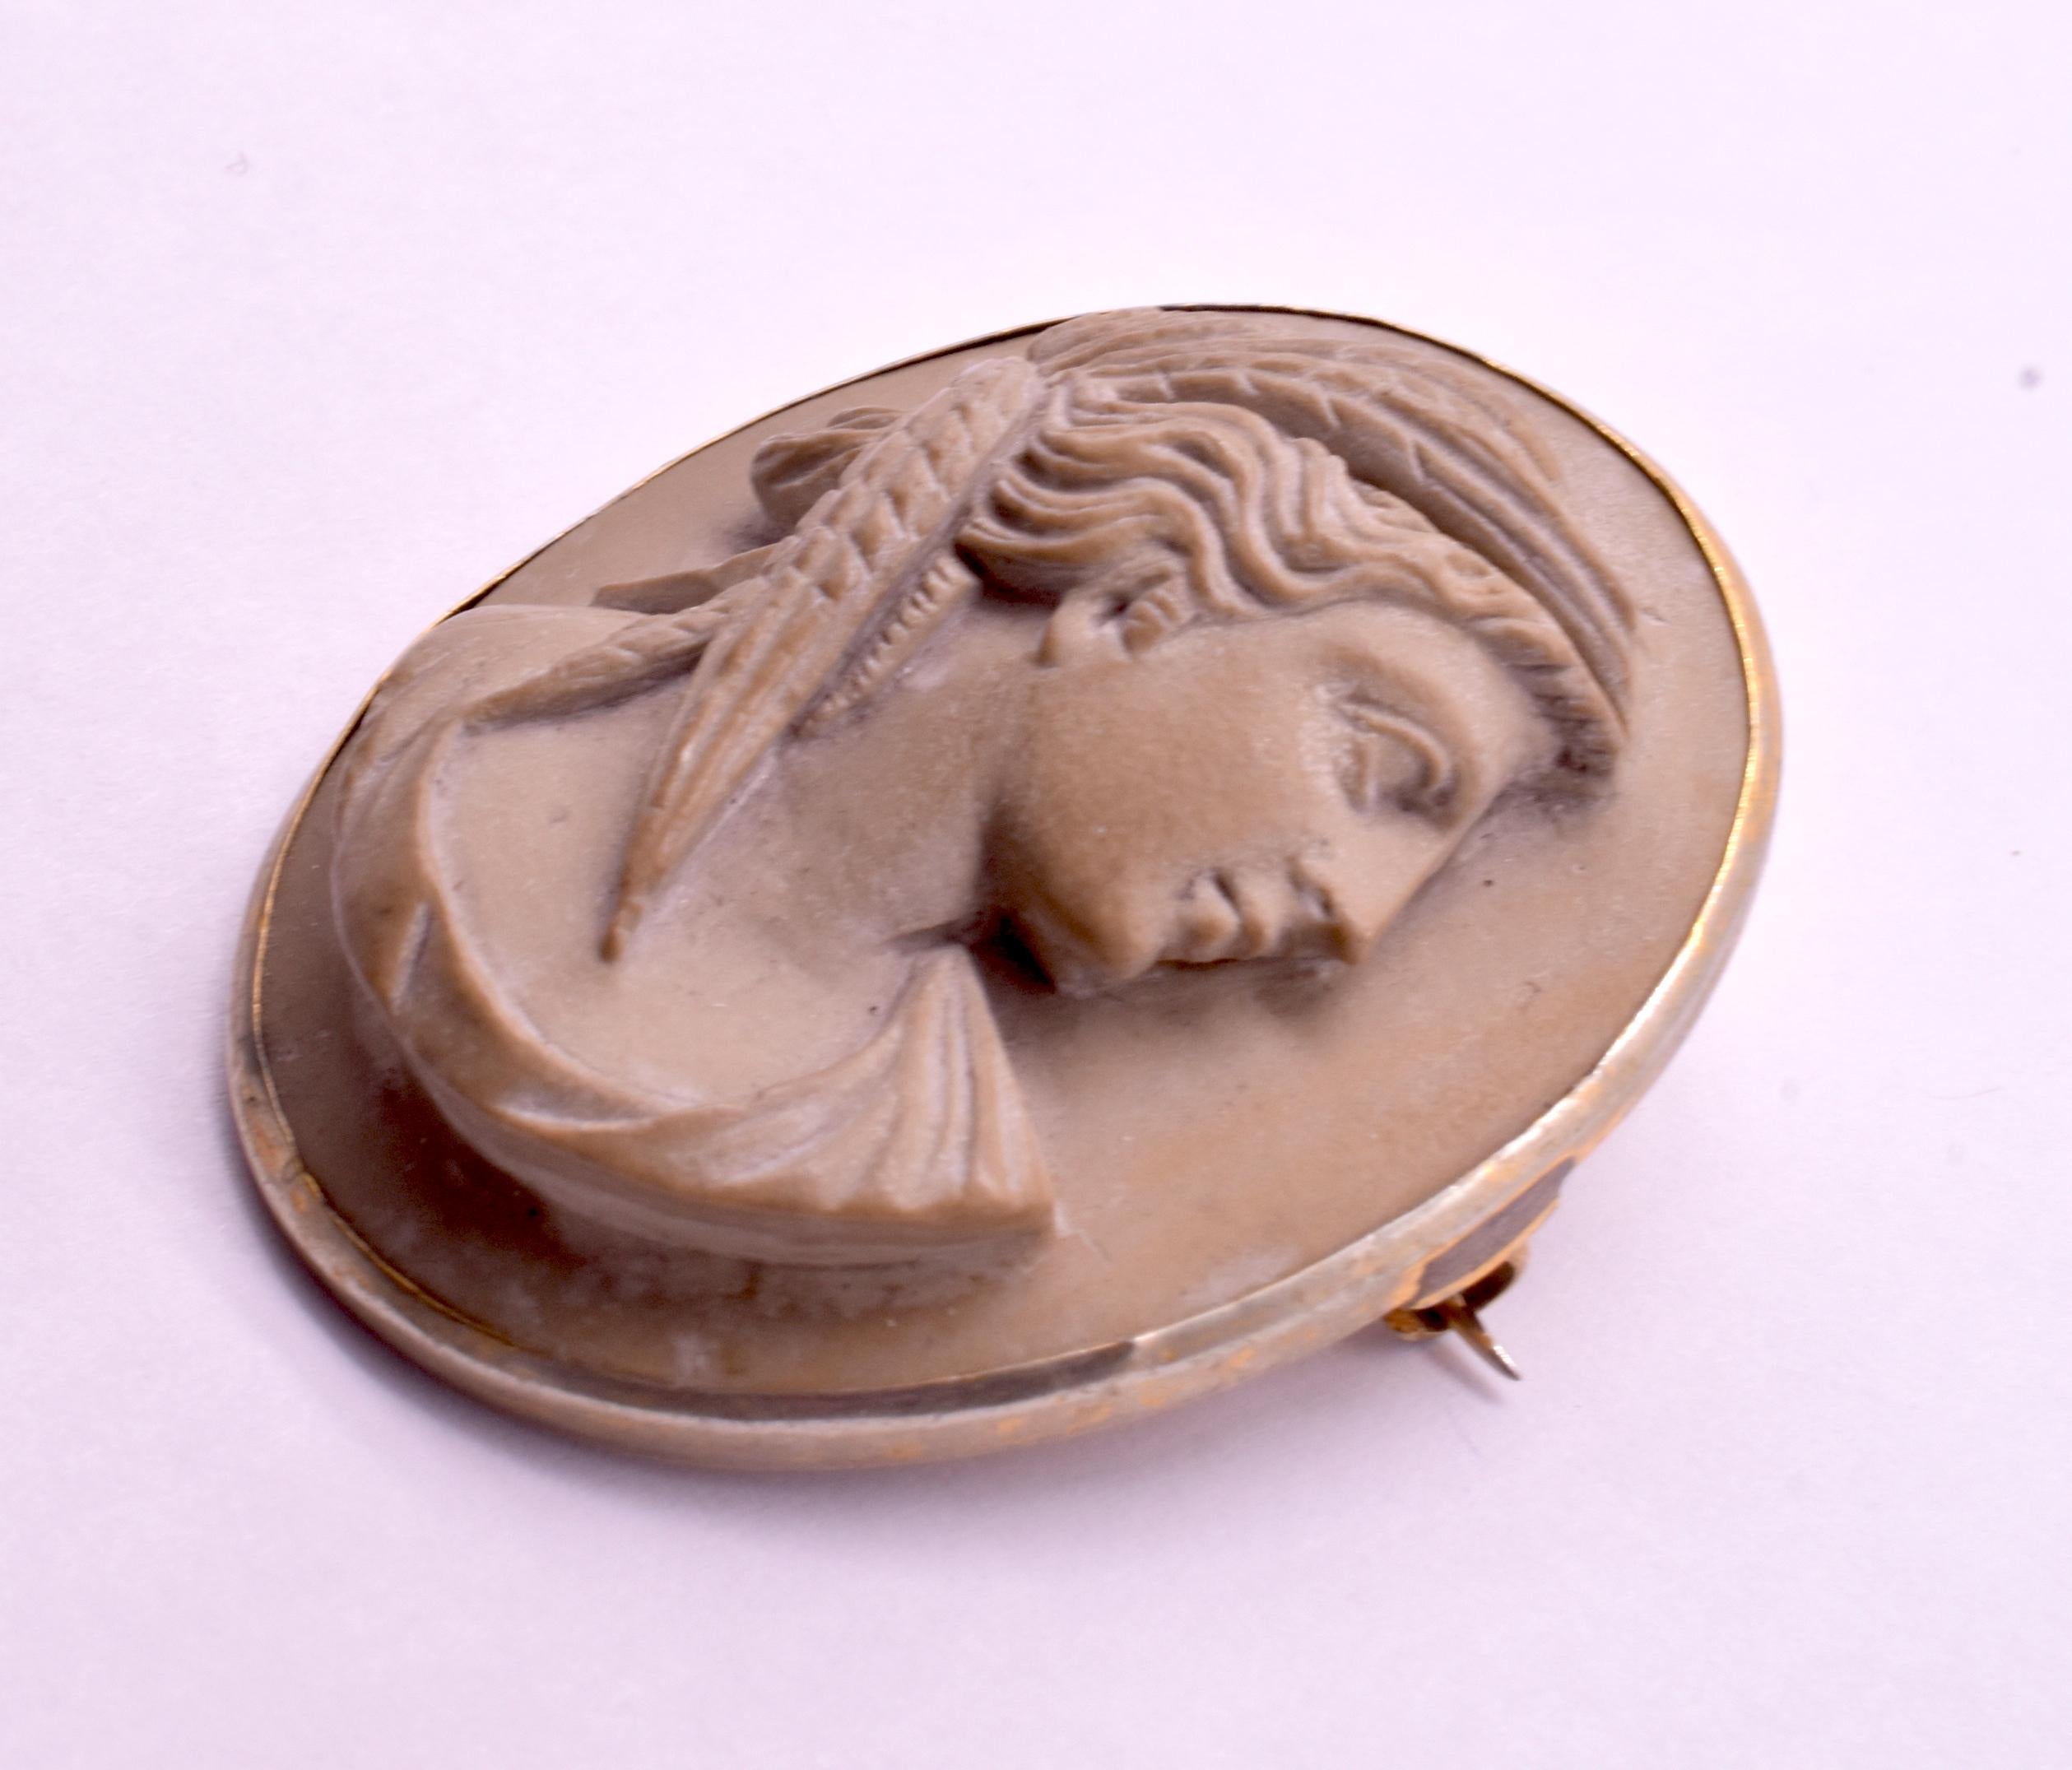 Finely carved brooch of the goddess Demeter (Roman: Ceres), goddess of agriculture, her hair wrapped in what appears to be a scarf of grain or corn. The important Greek goddesses were a popular theme in cameo carvings of the 19th century, with